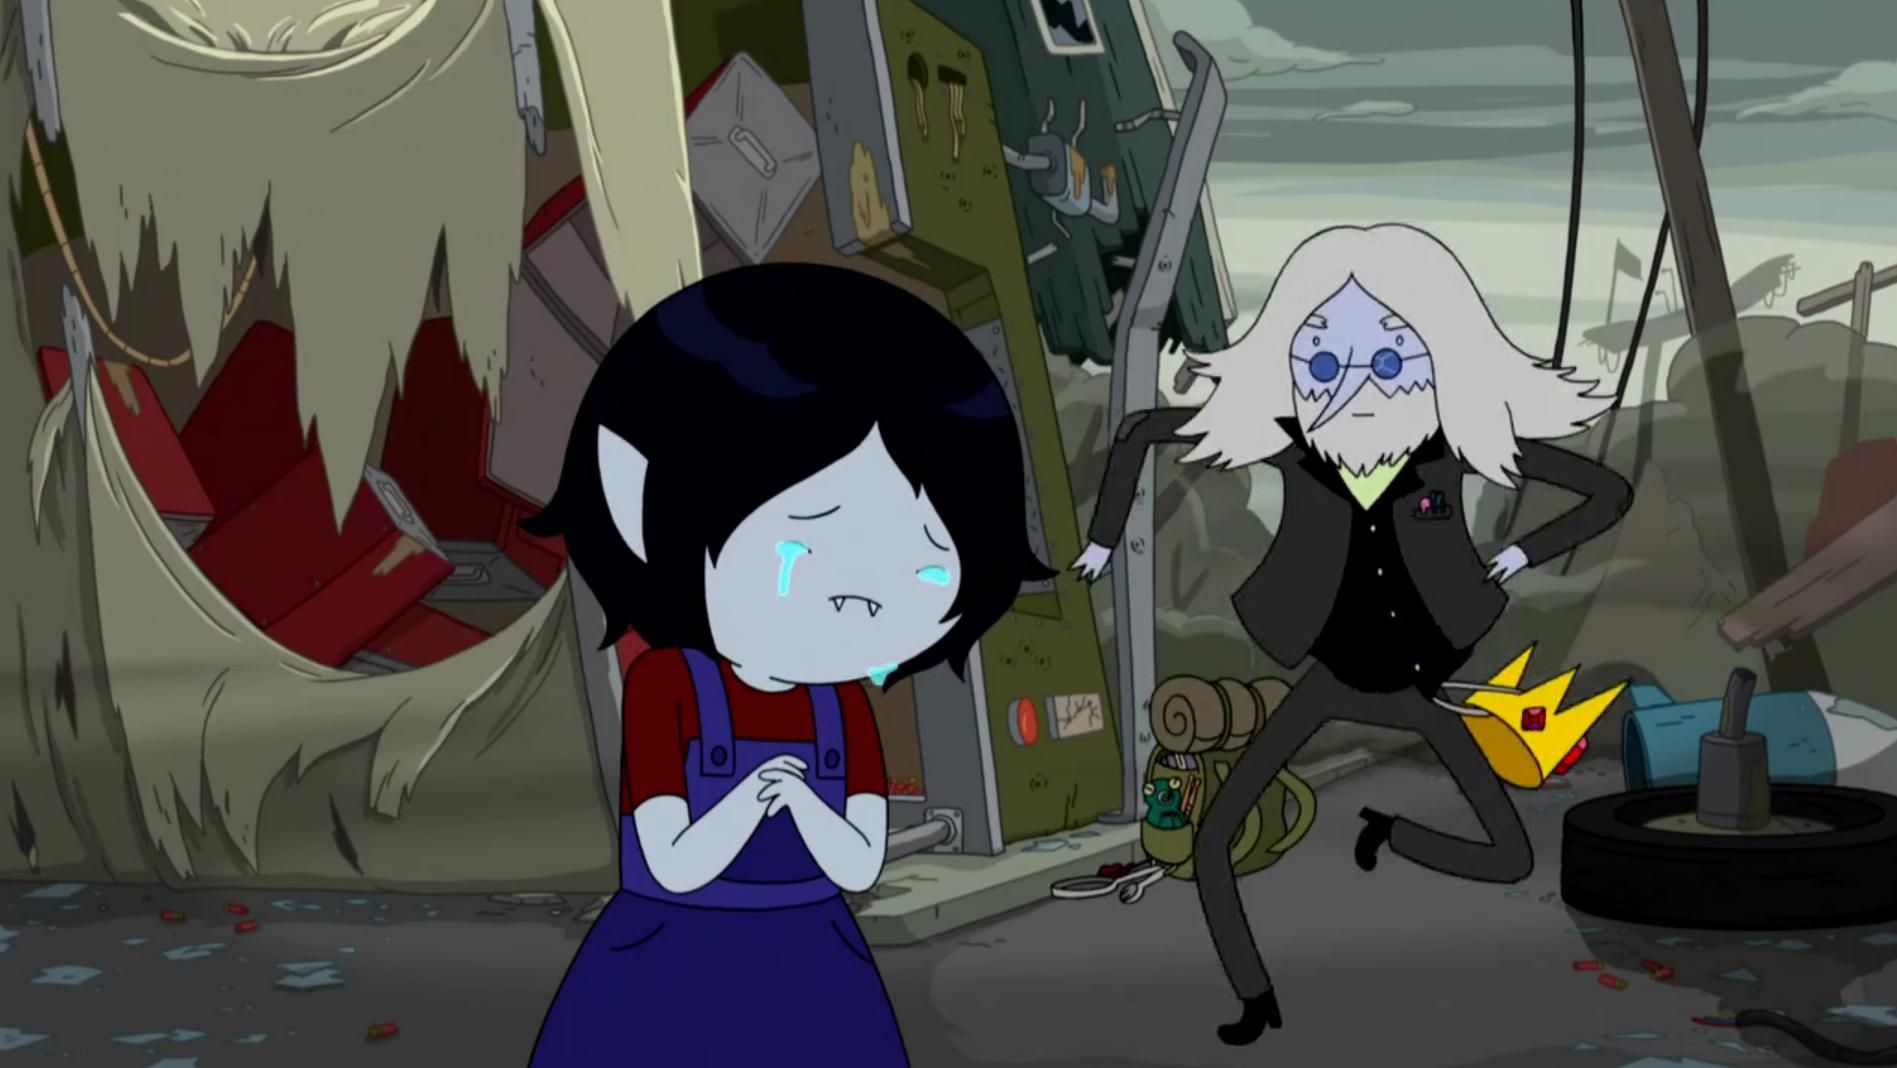 Simon runs to protect Marcy in Adventure Time